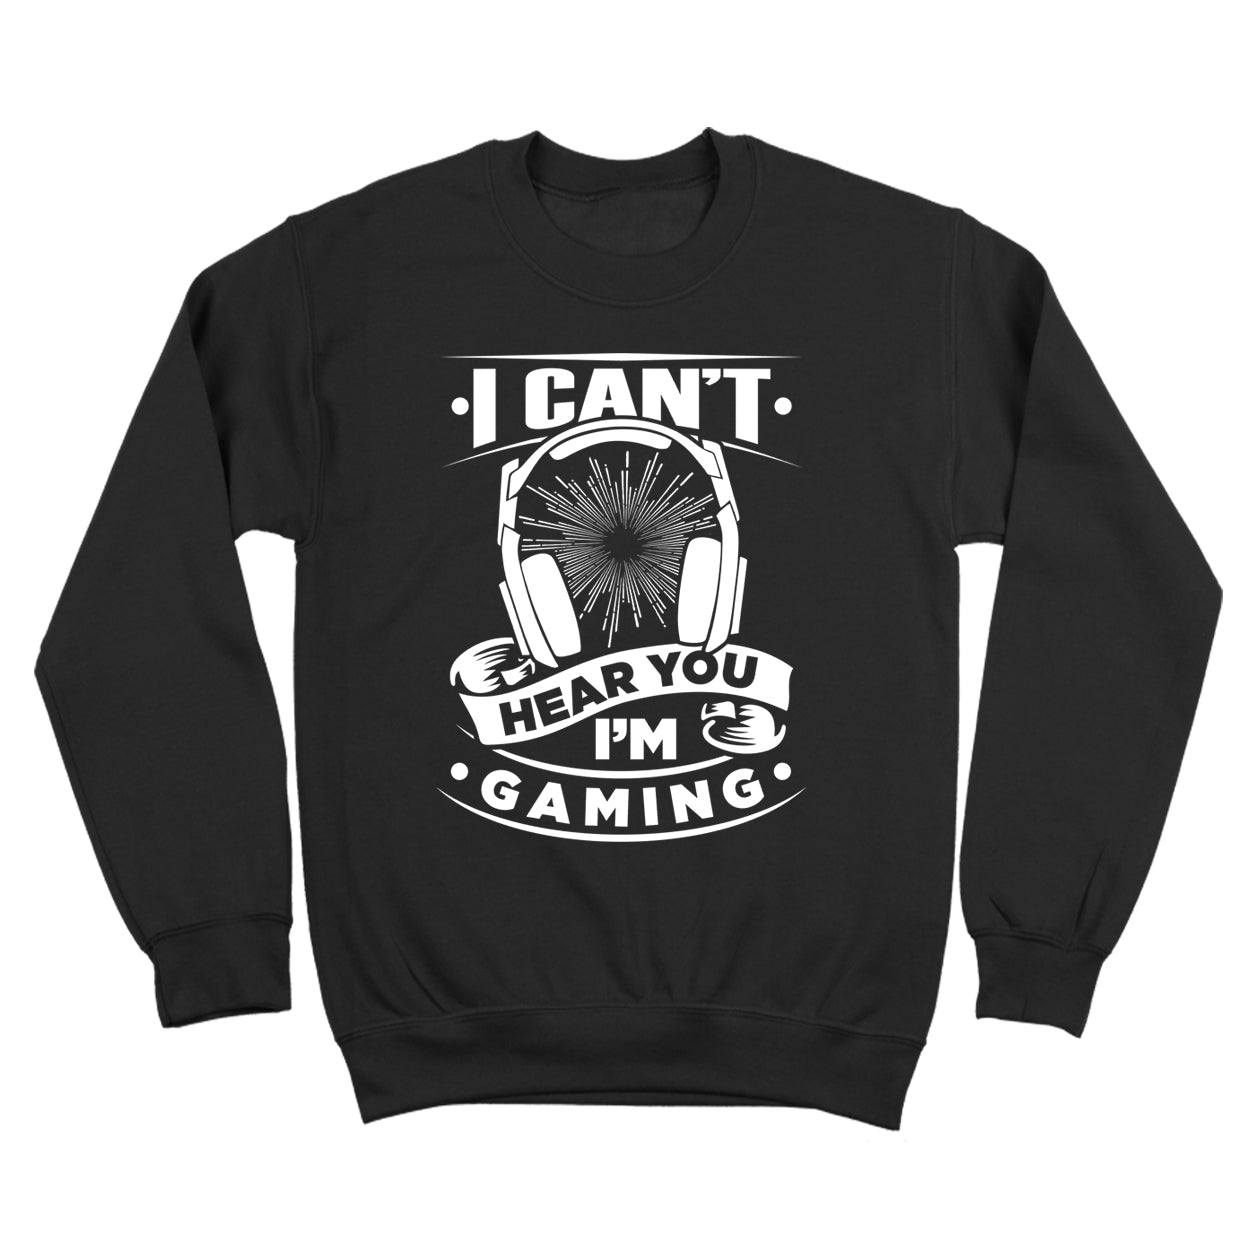 I Can't Hear You I'm Gaming | Funny T-shirts in sizes